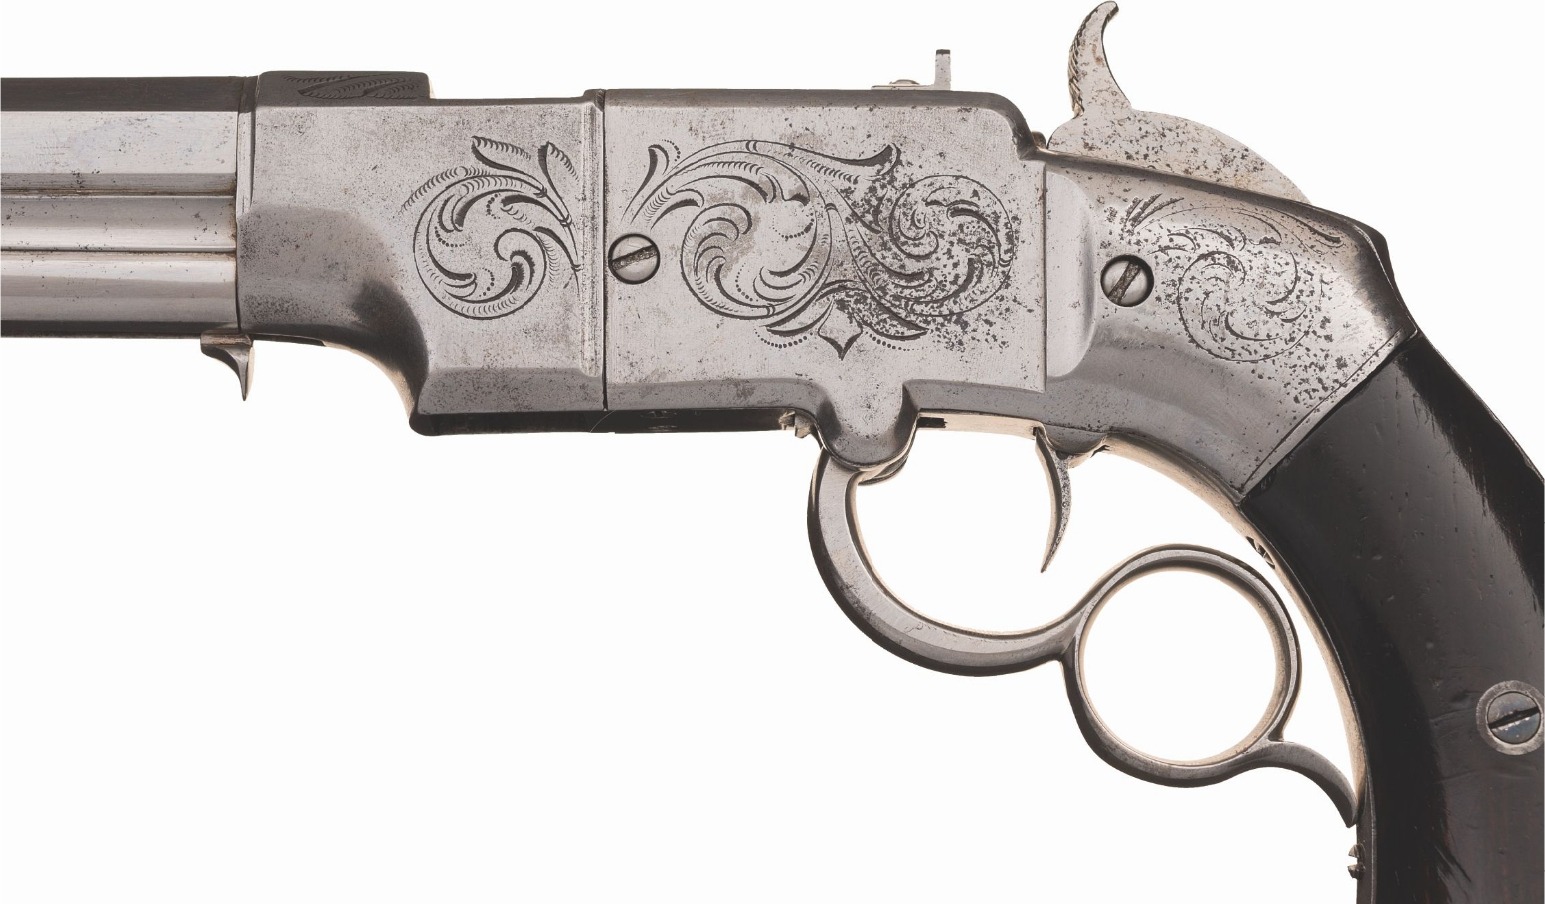 Smith and Wesson Volcanic lever action pistol